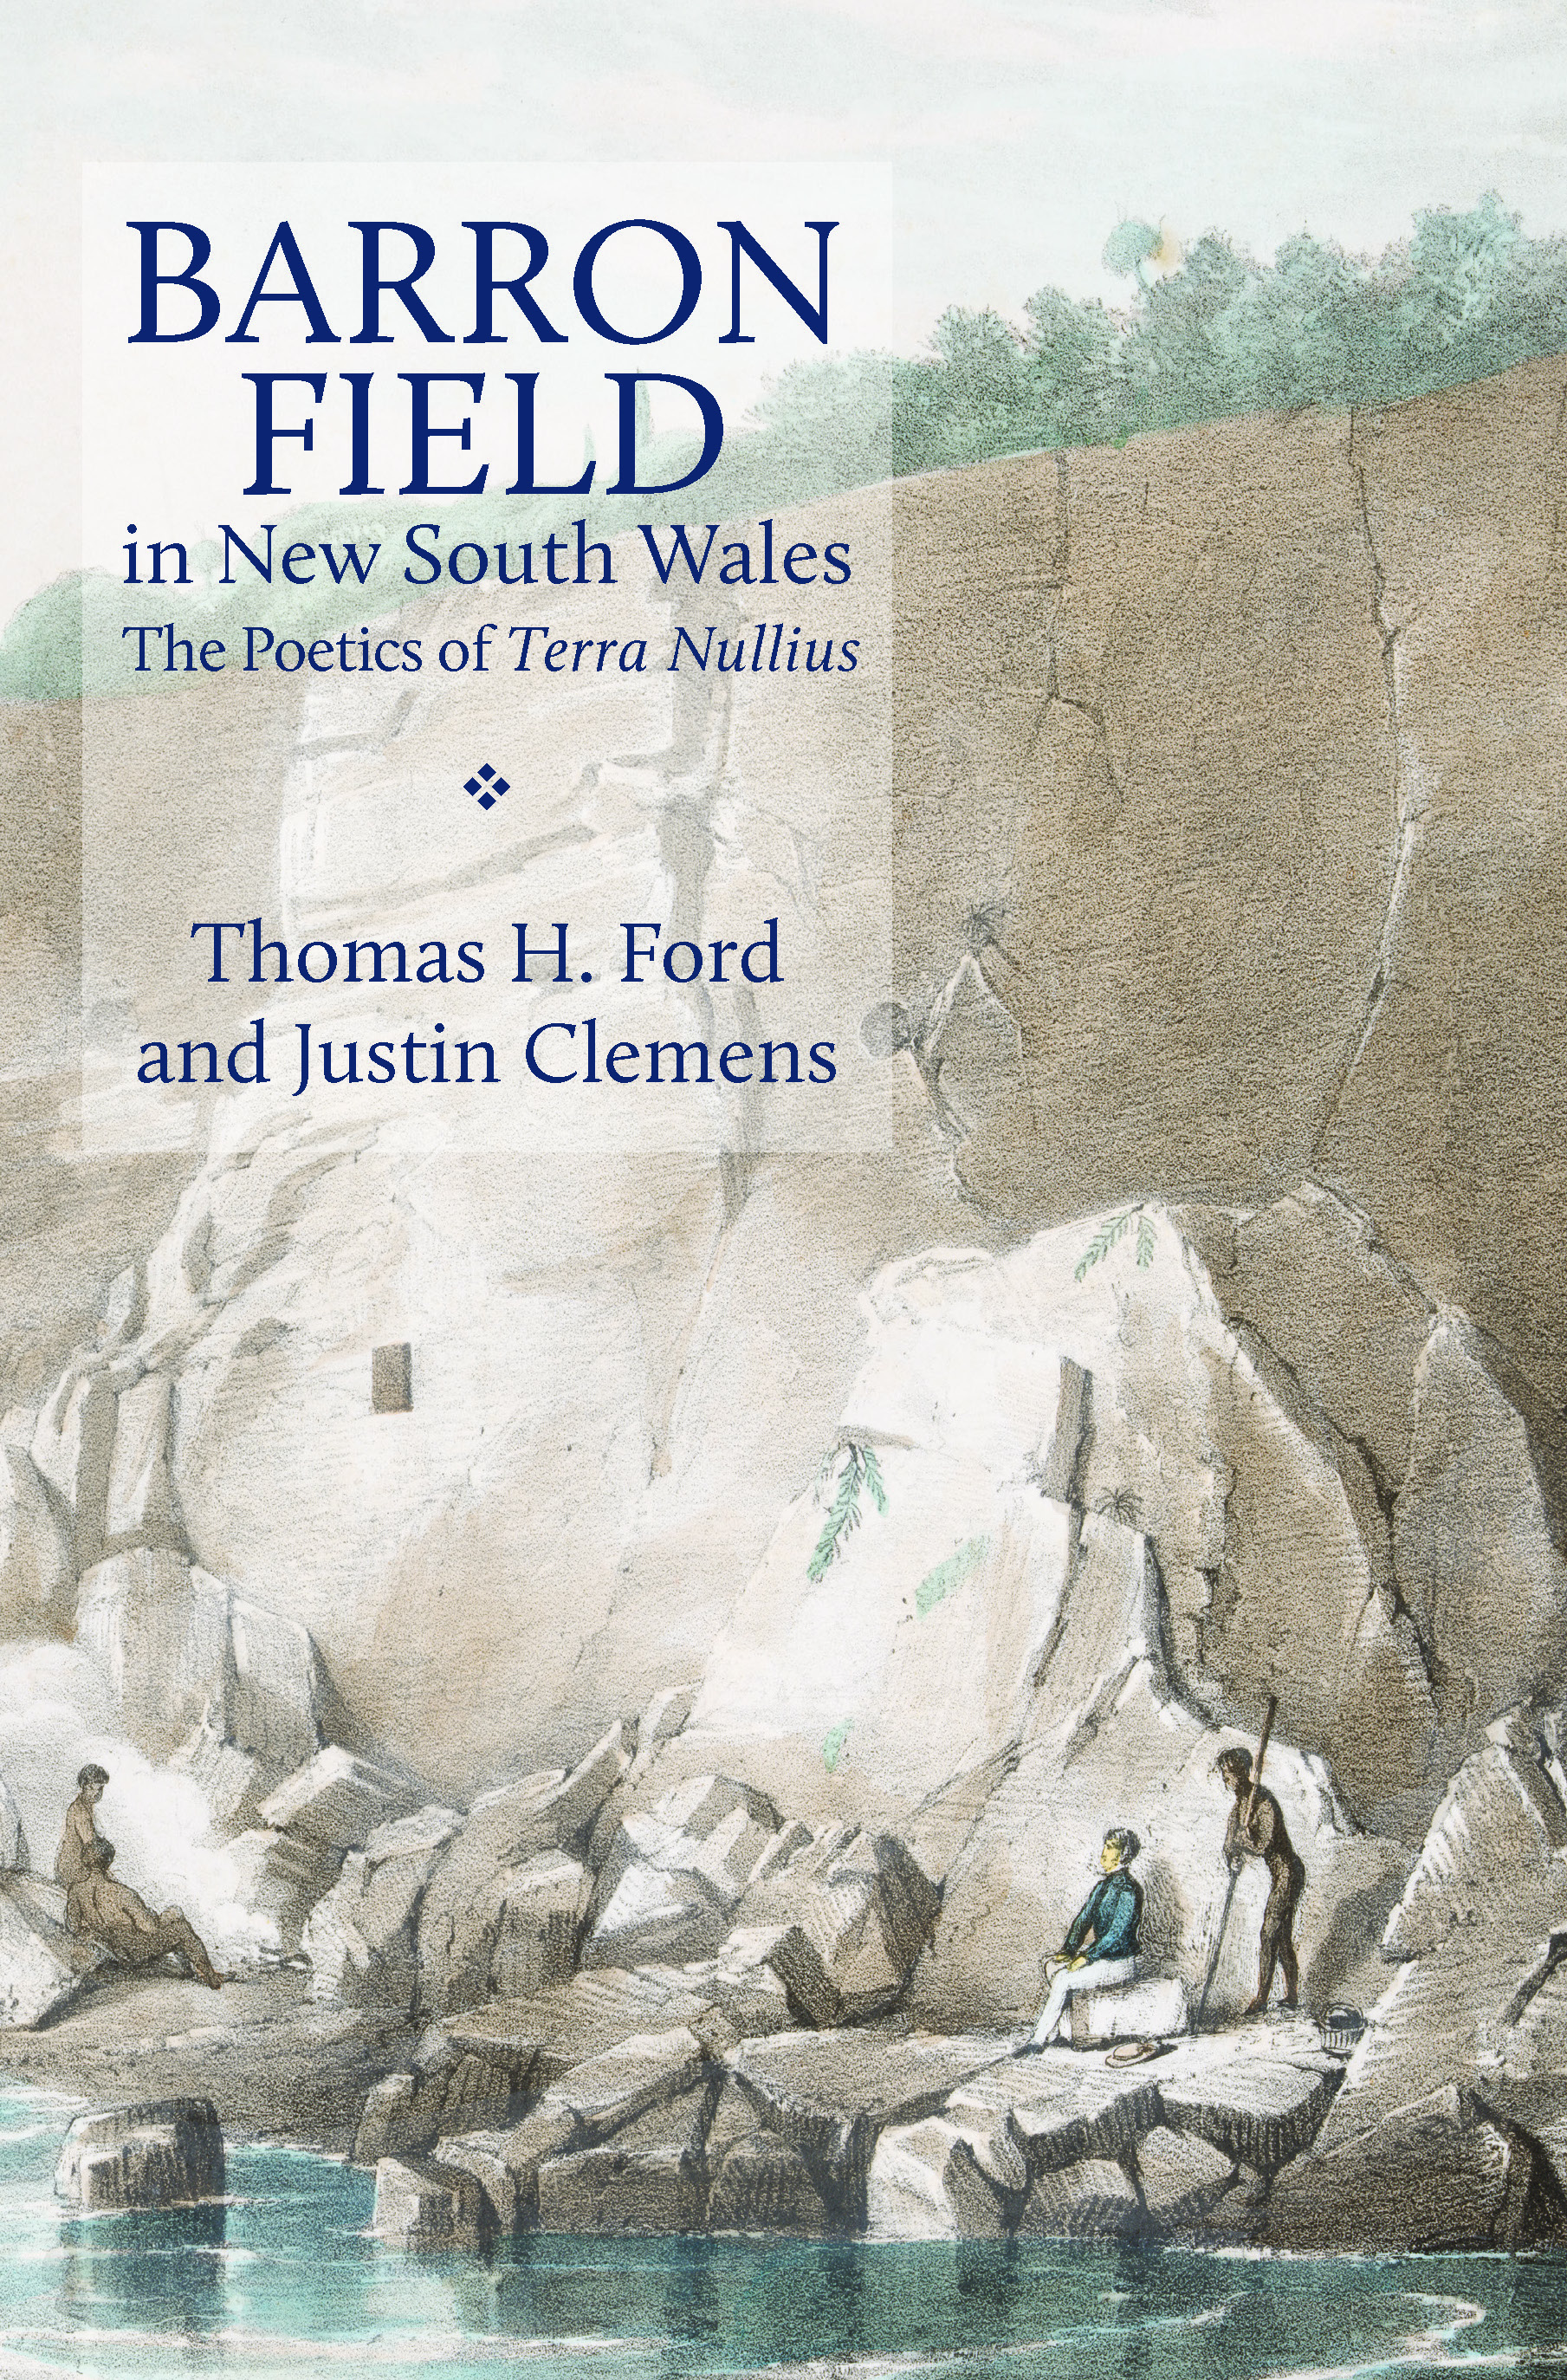 Barron Field in New South Wales: The poetics of Terra Nullius